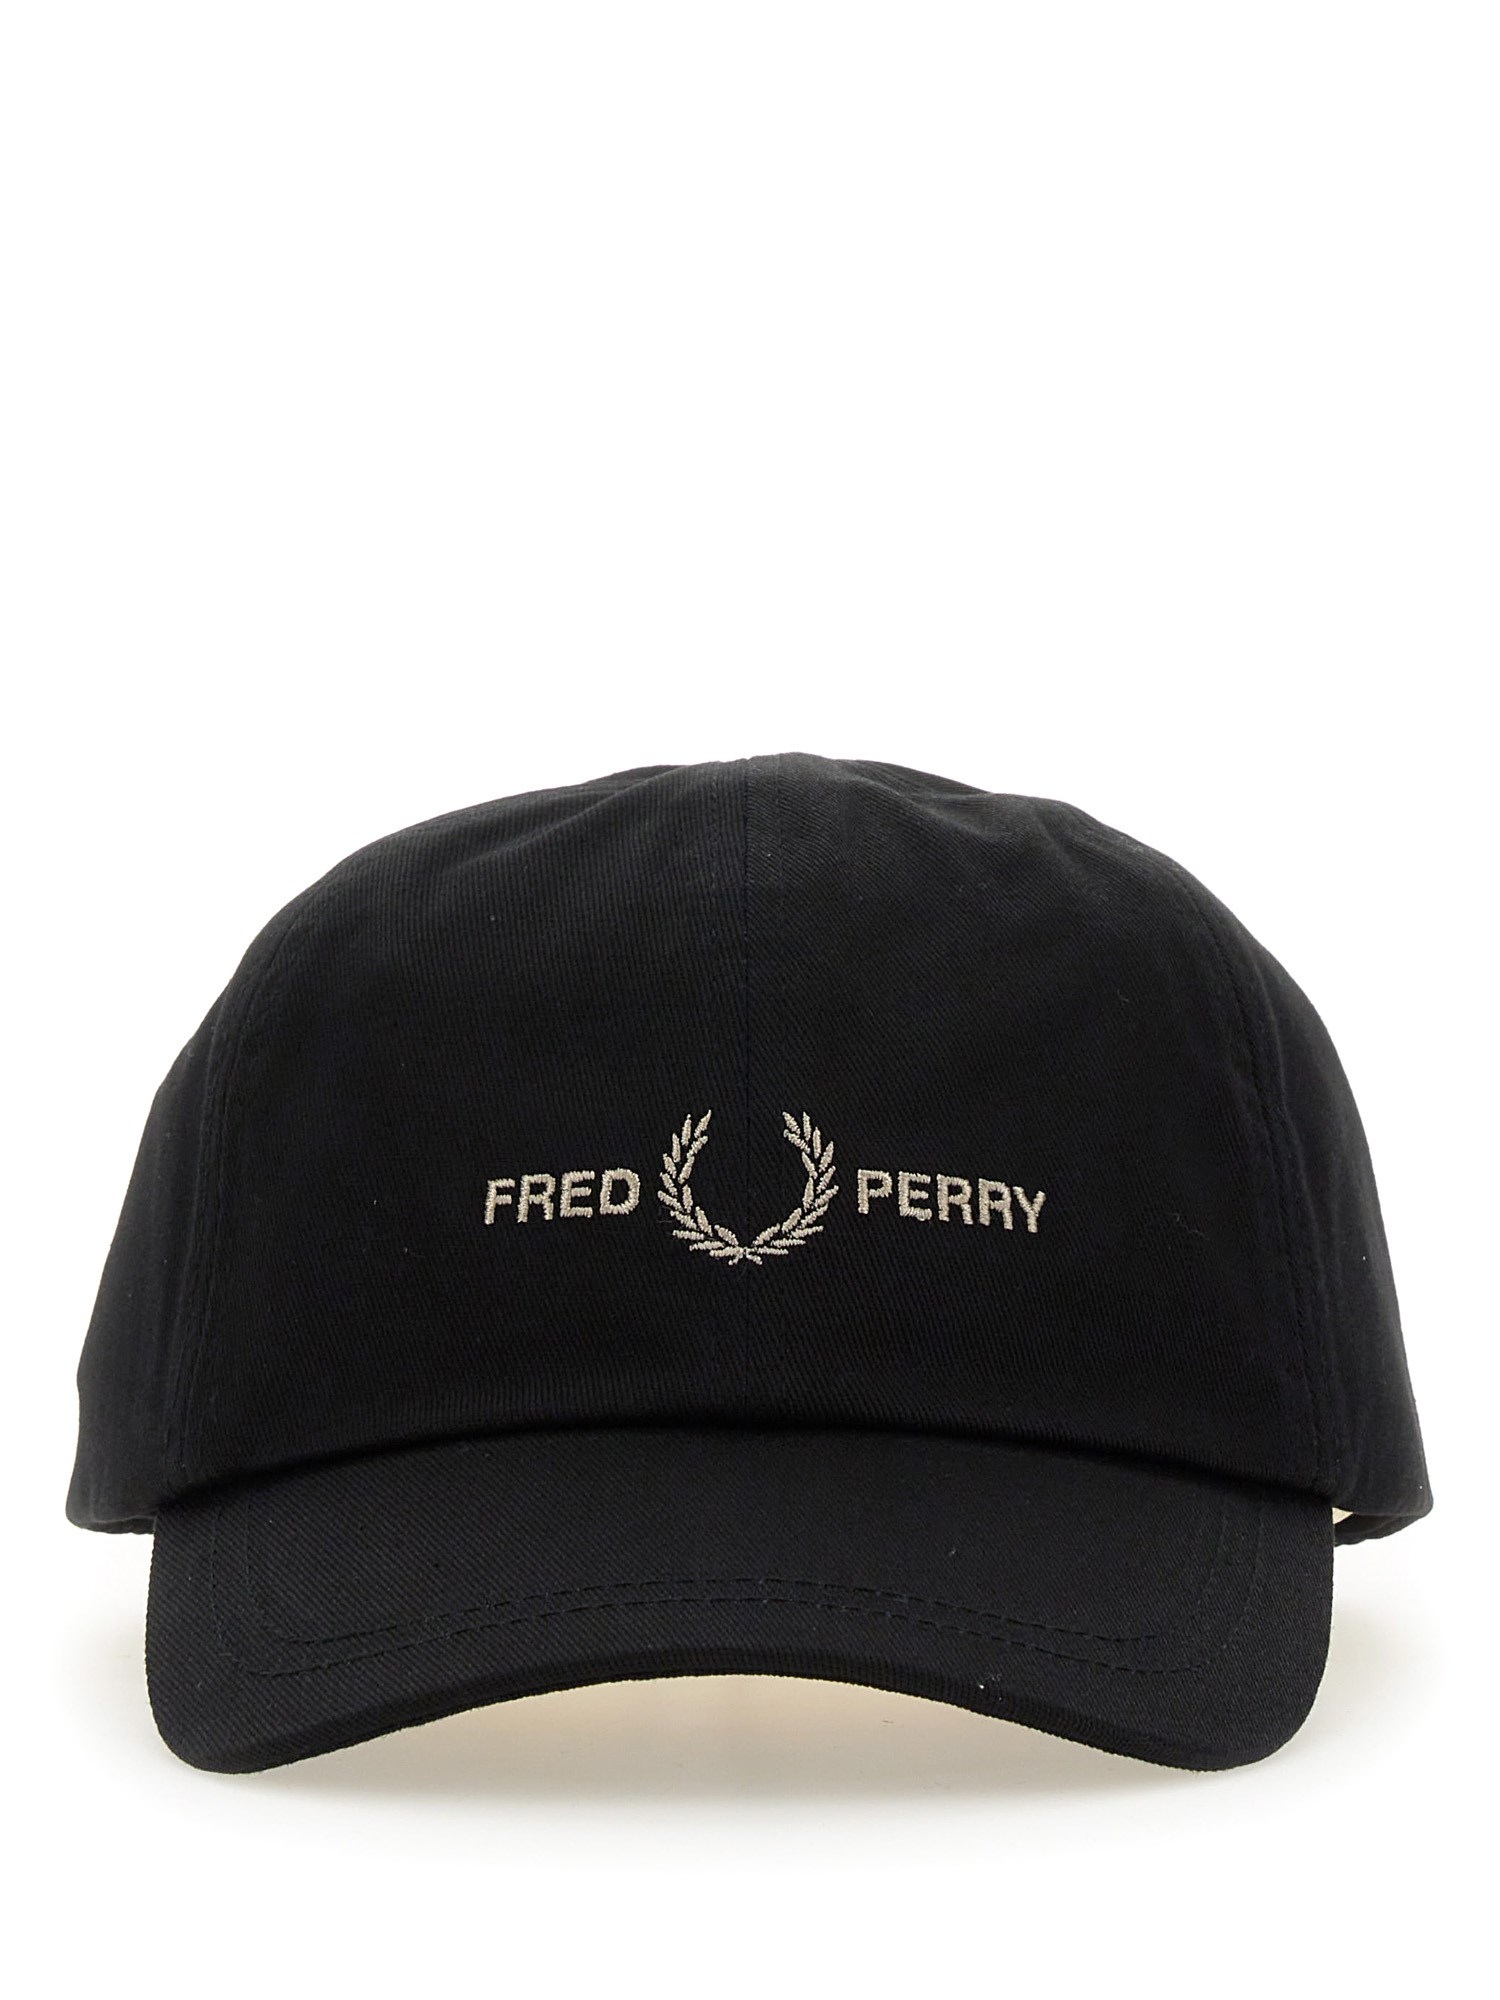 fred perry baseball hat with logo